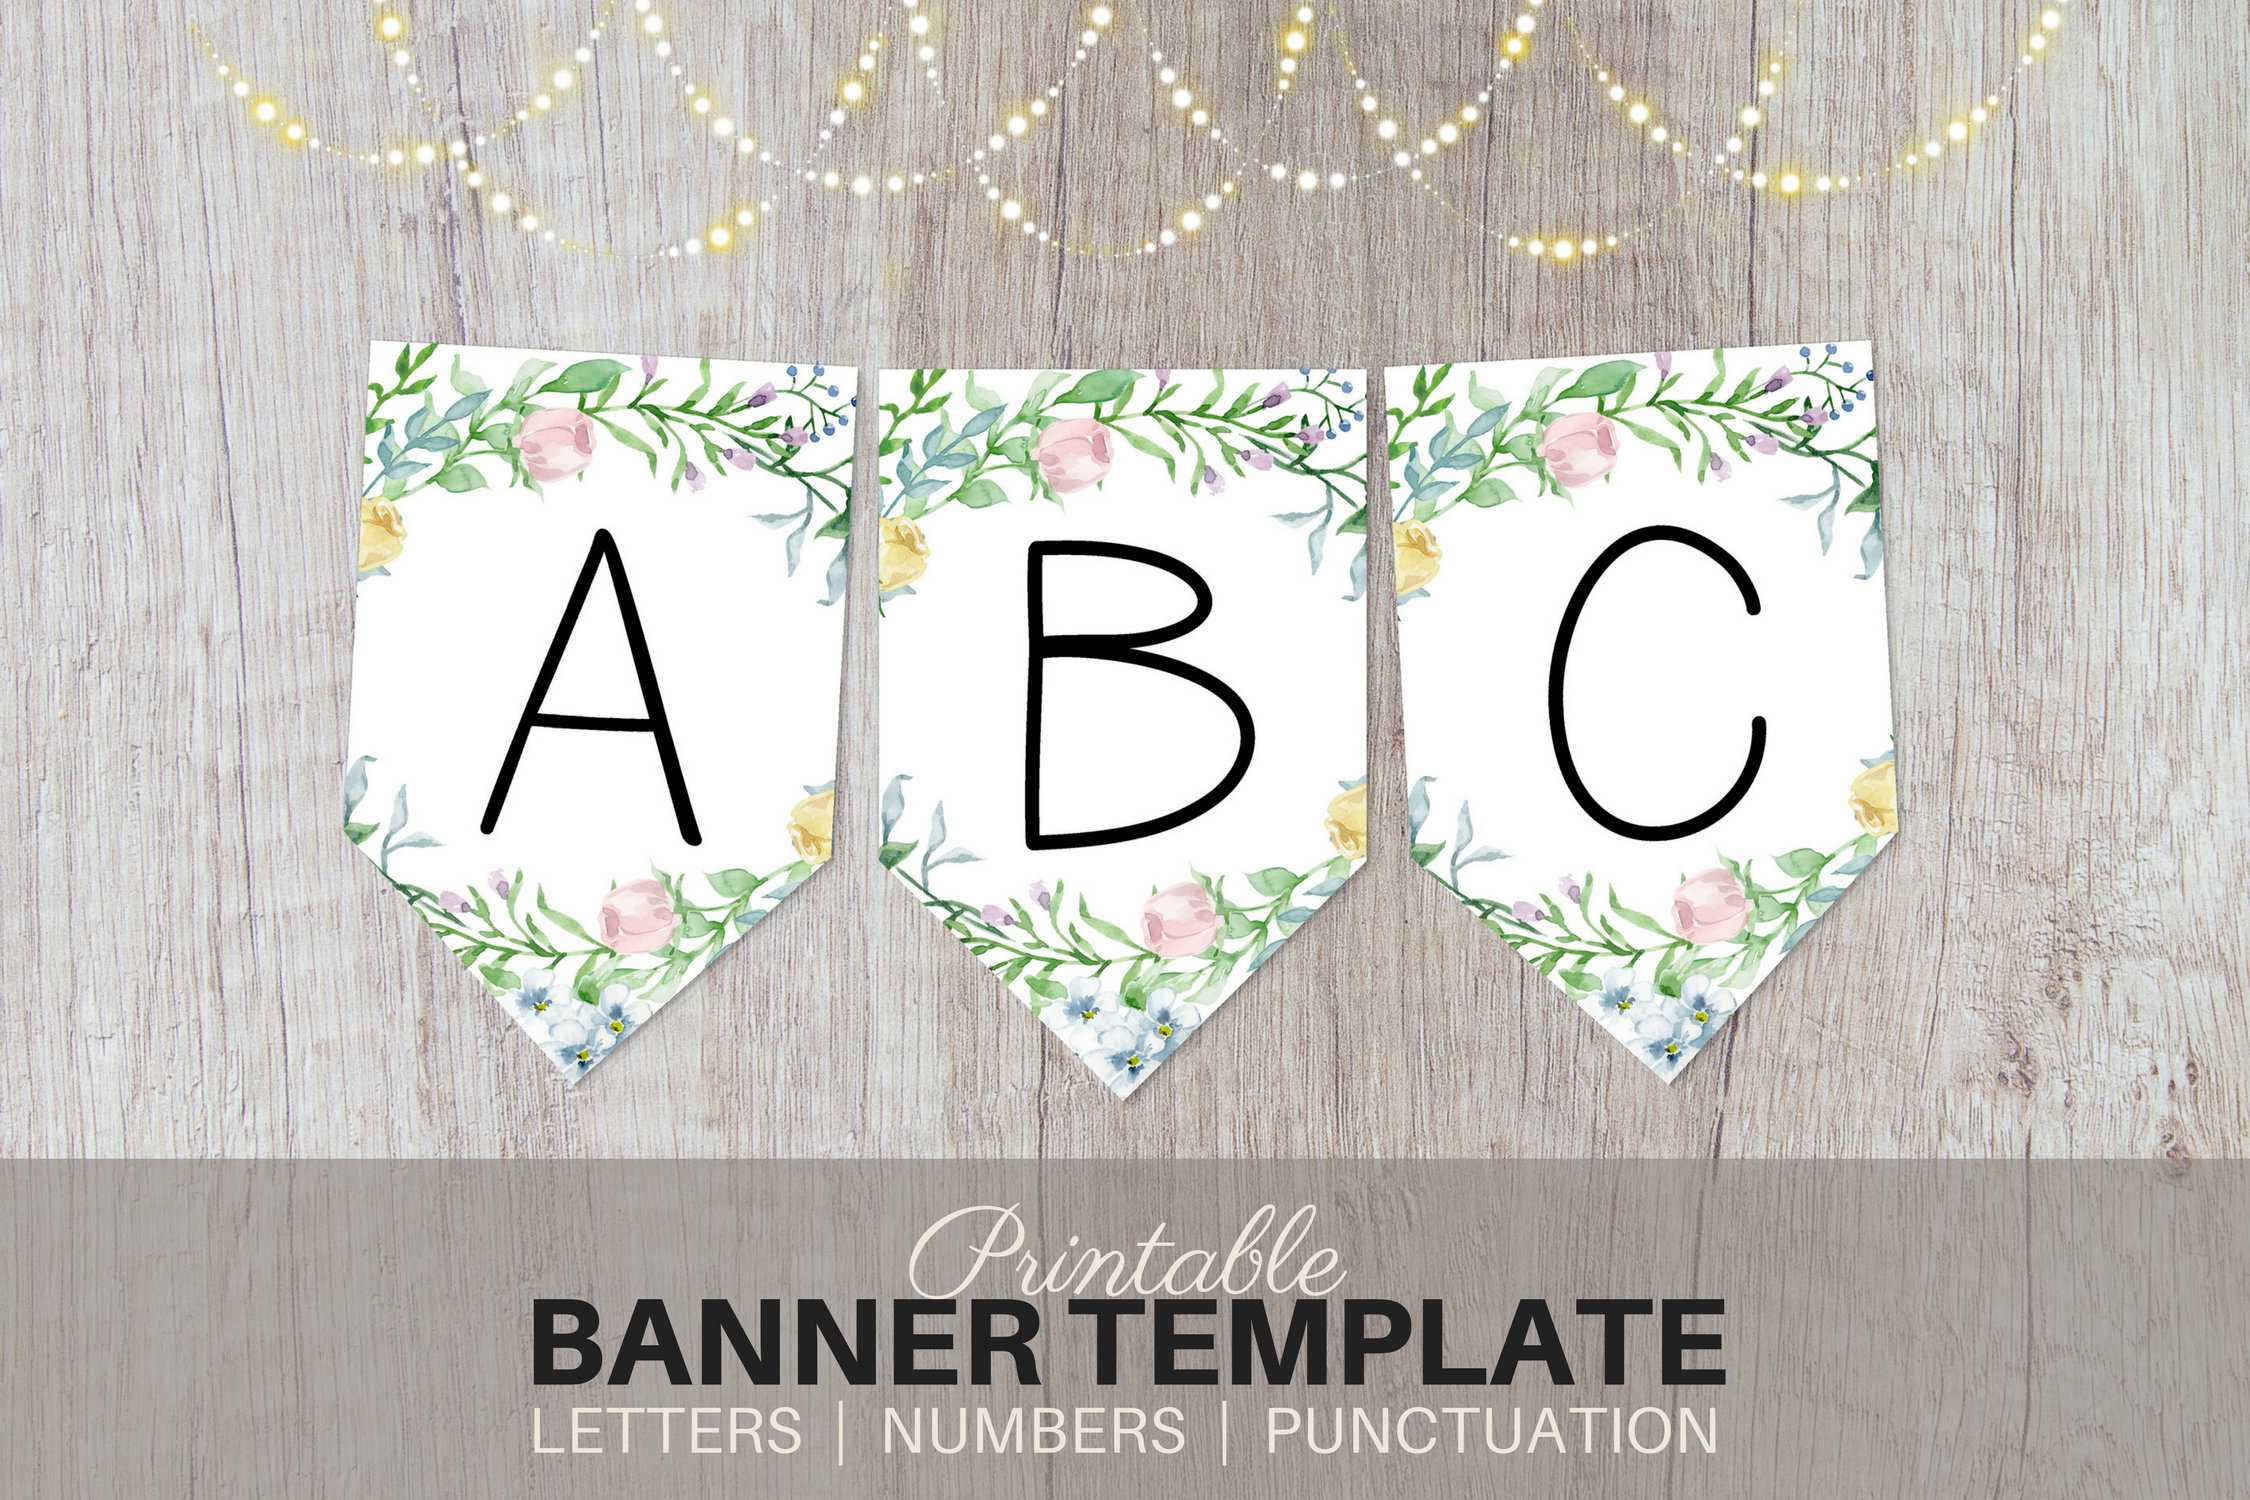 Printable Custom Banner Template – Spring Floral Roses – Personalized  Banner Pdf Bridal Shower, Birthday, Baby Shower, Party Intended For Bride To Be Banner Template